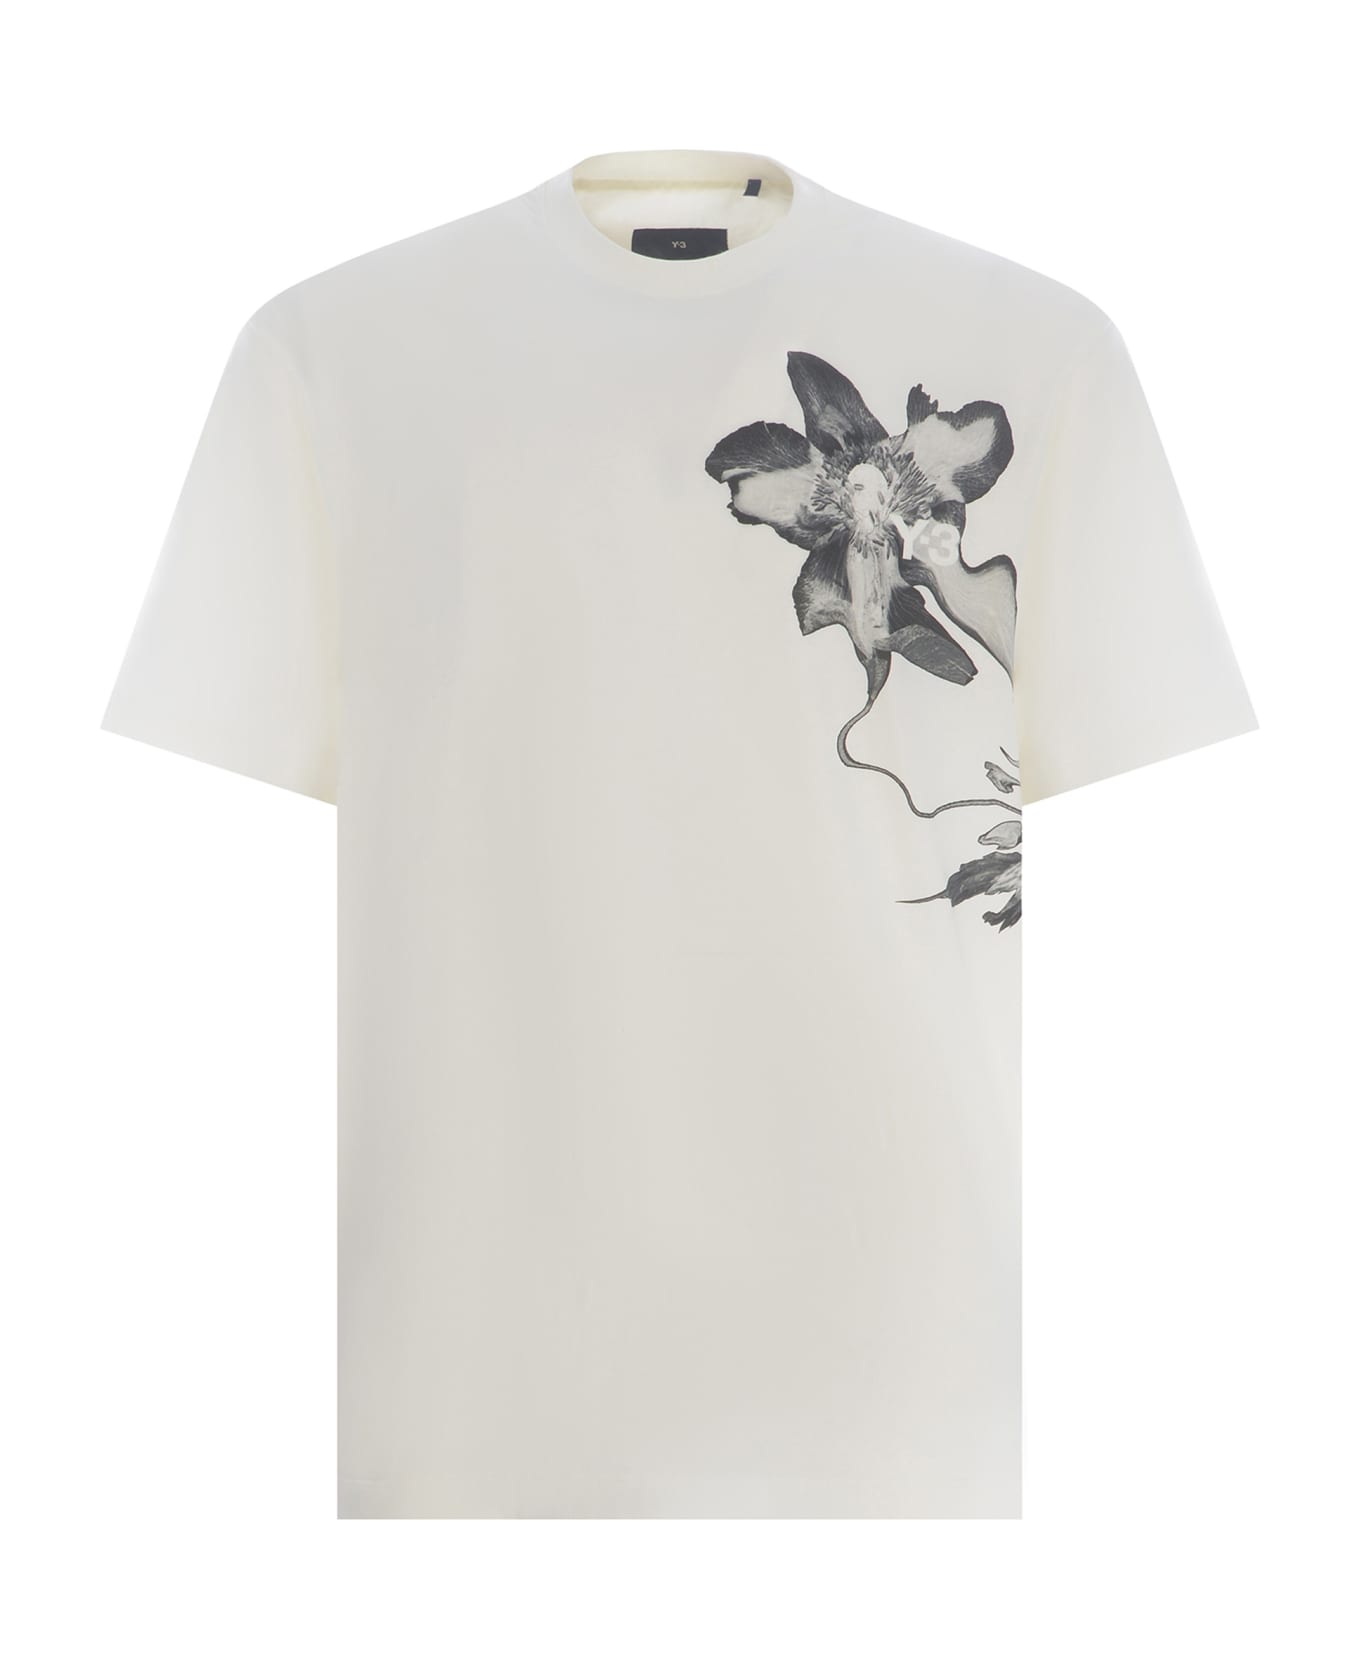 Y-3 T-shirt Y-3 "graphic" Made Of Cotton Jersey - Off white シャツ